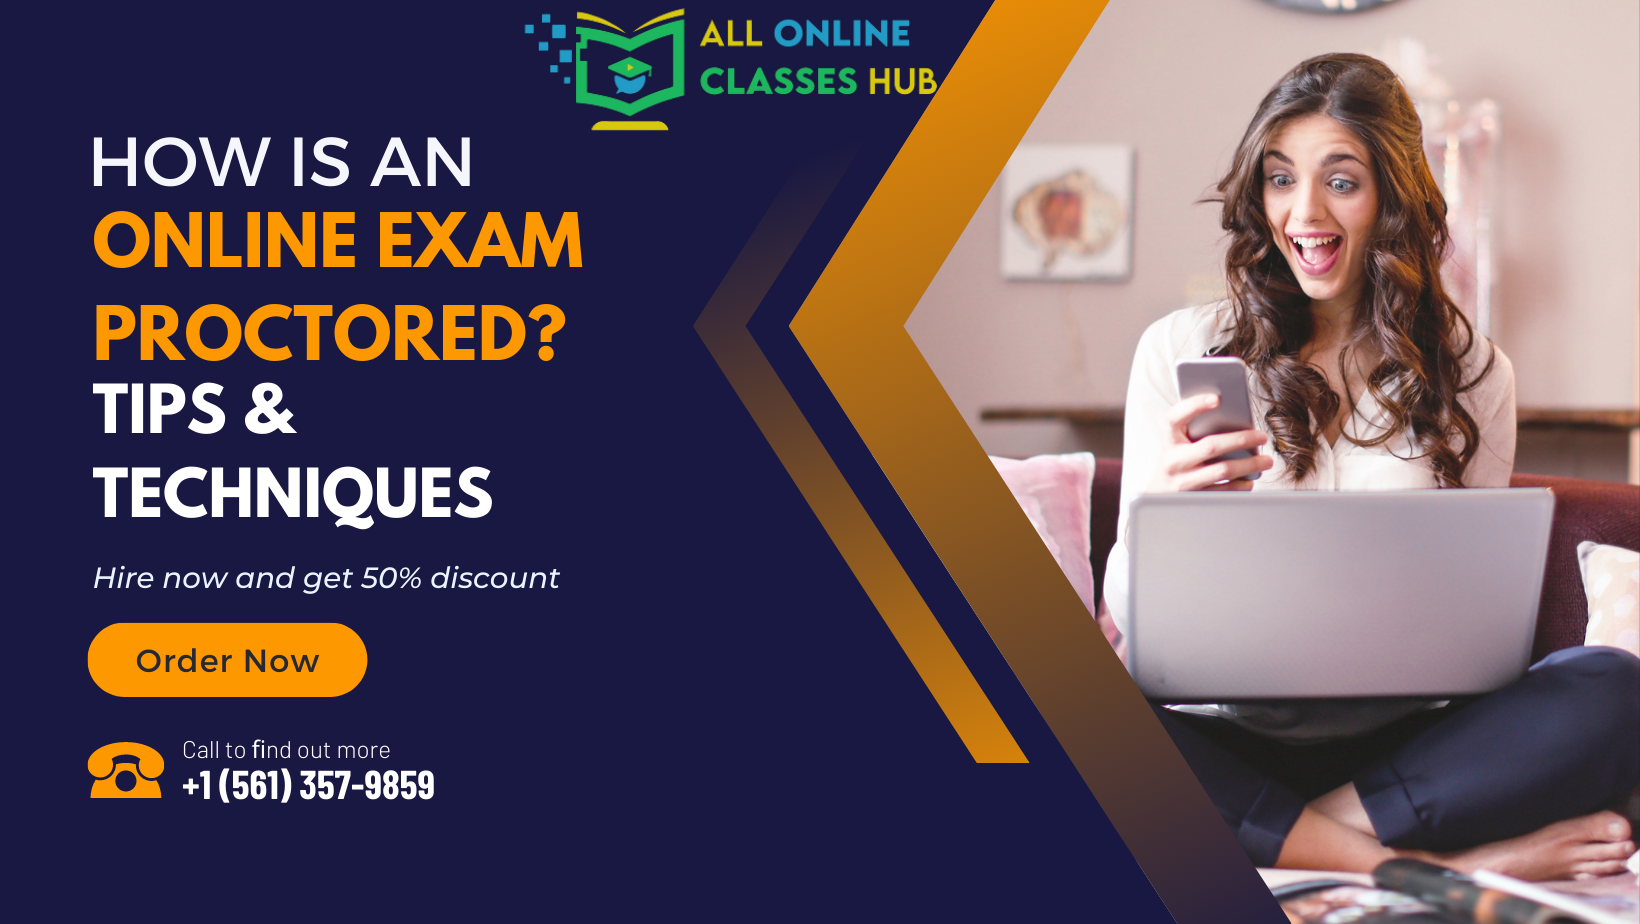 How is an online exam proctored? Tips & Techniques